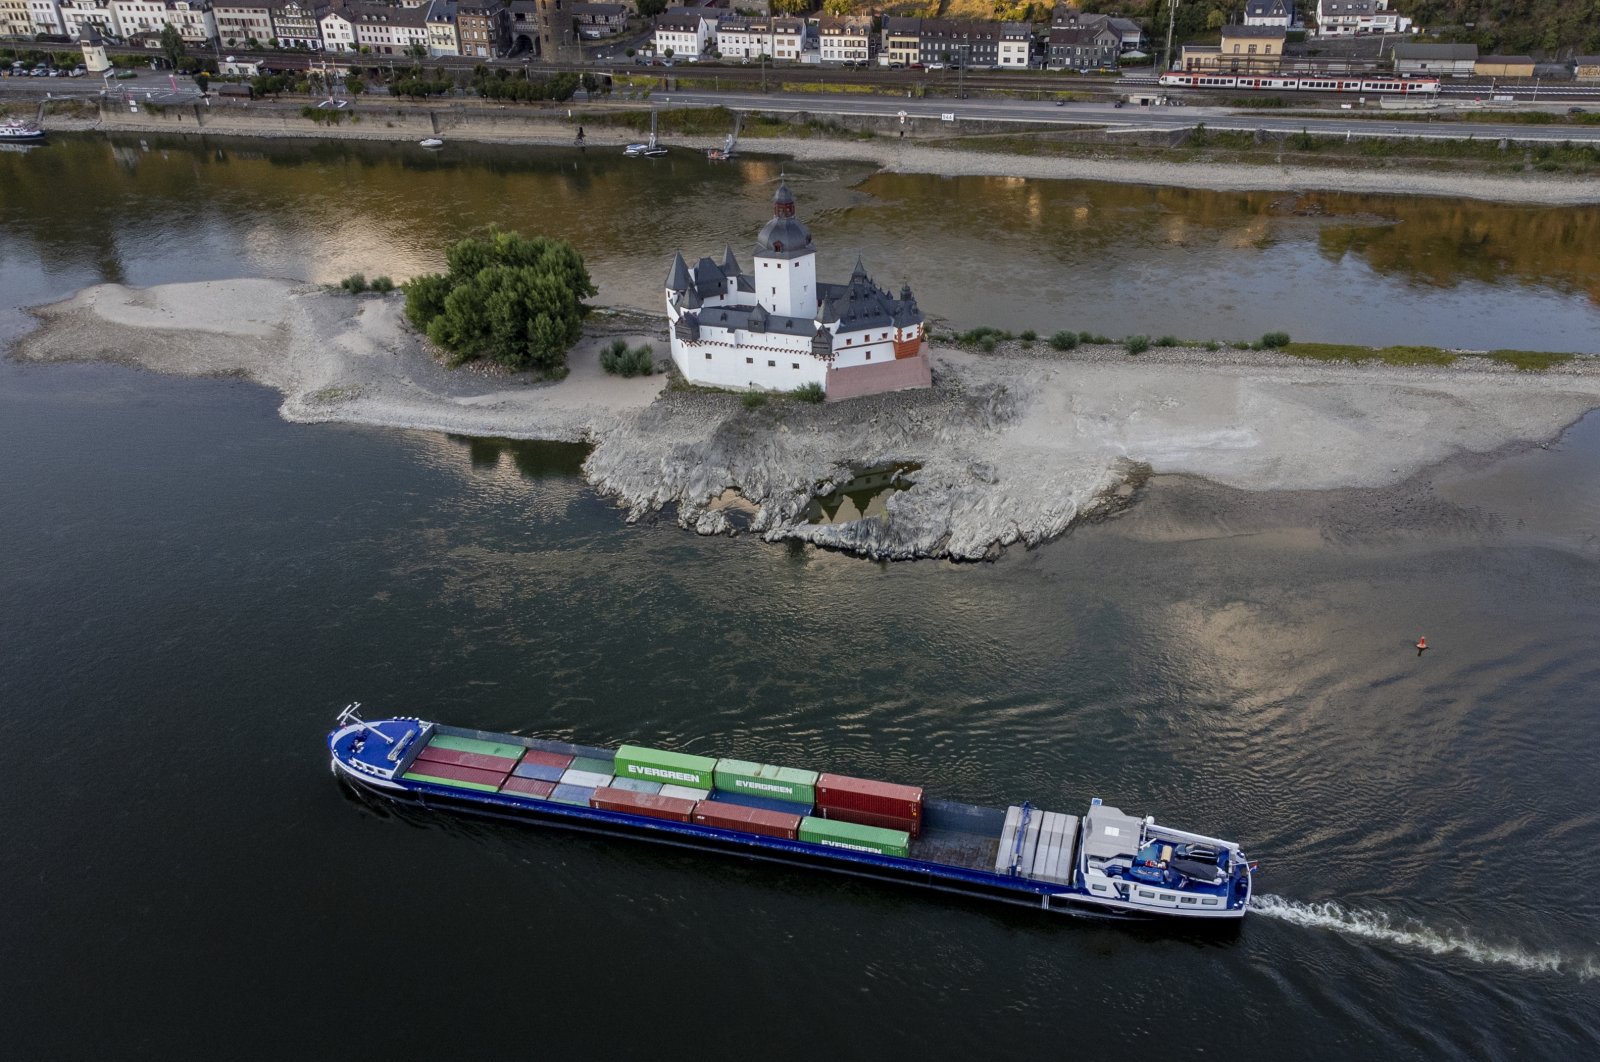 A container ships passes Pfalzgrafenstein castle in the middle of the river Rhine in Kaub, Germany, Aug. 12, 2022. (AP Photo)